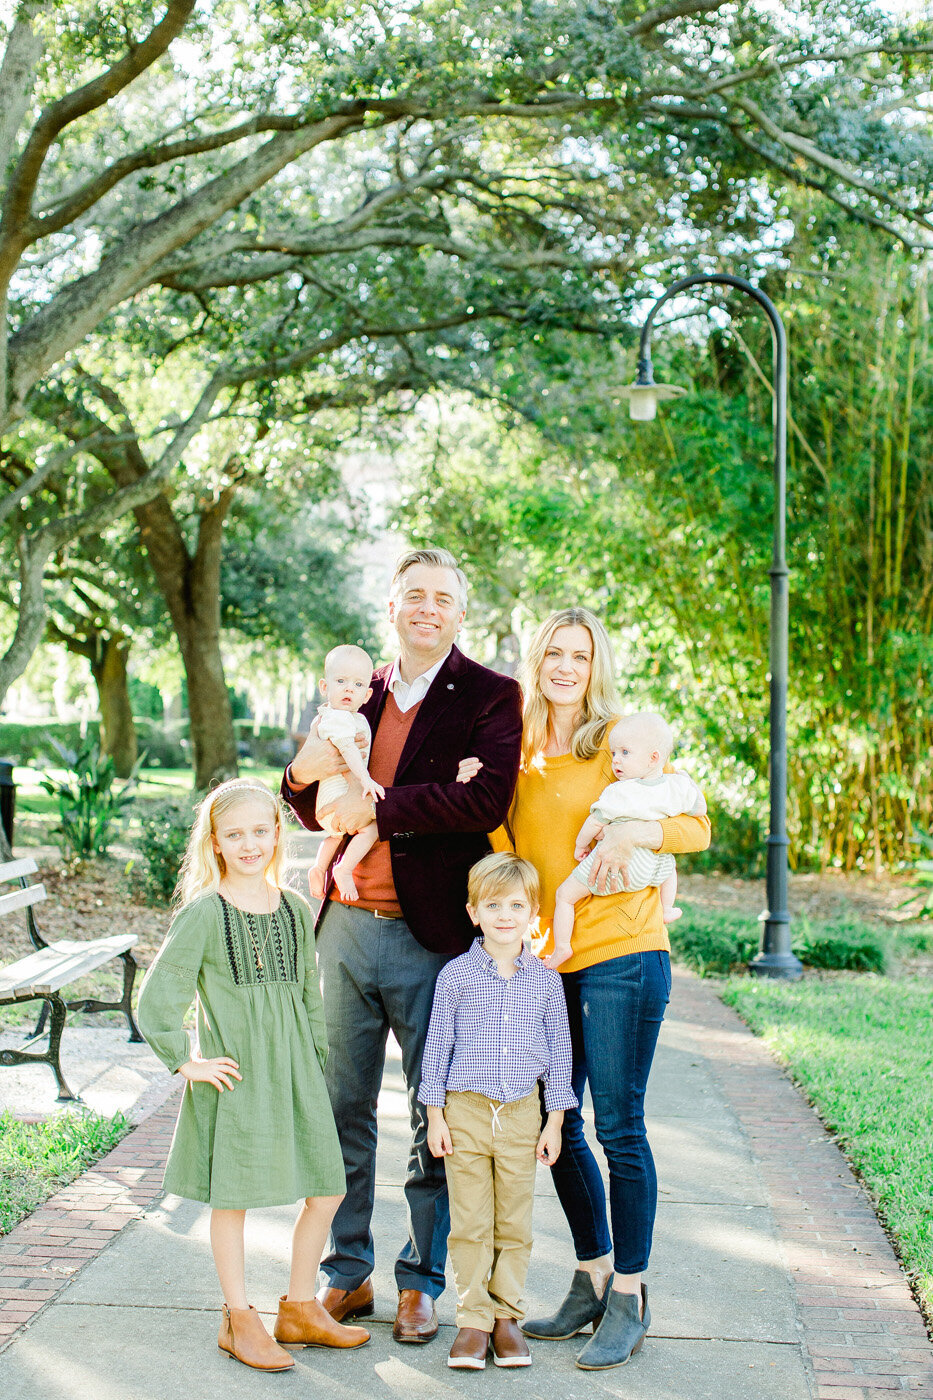 Tampa Family Photographer - Ailyn LaTorre 28